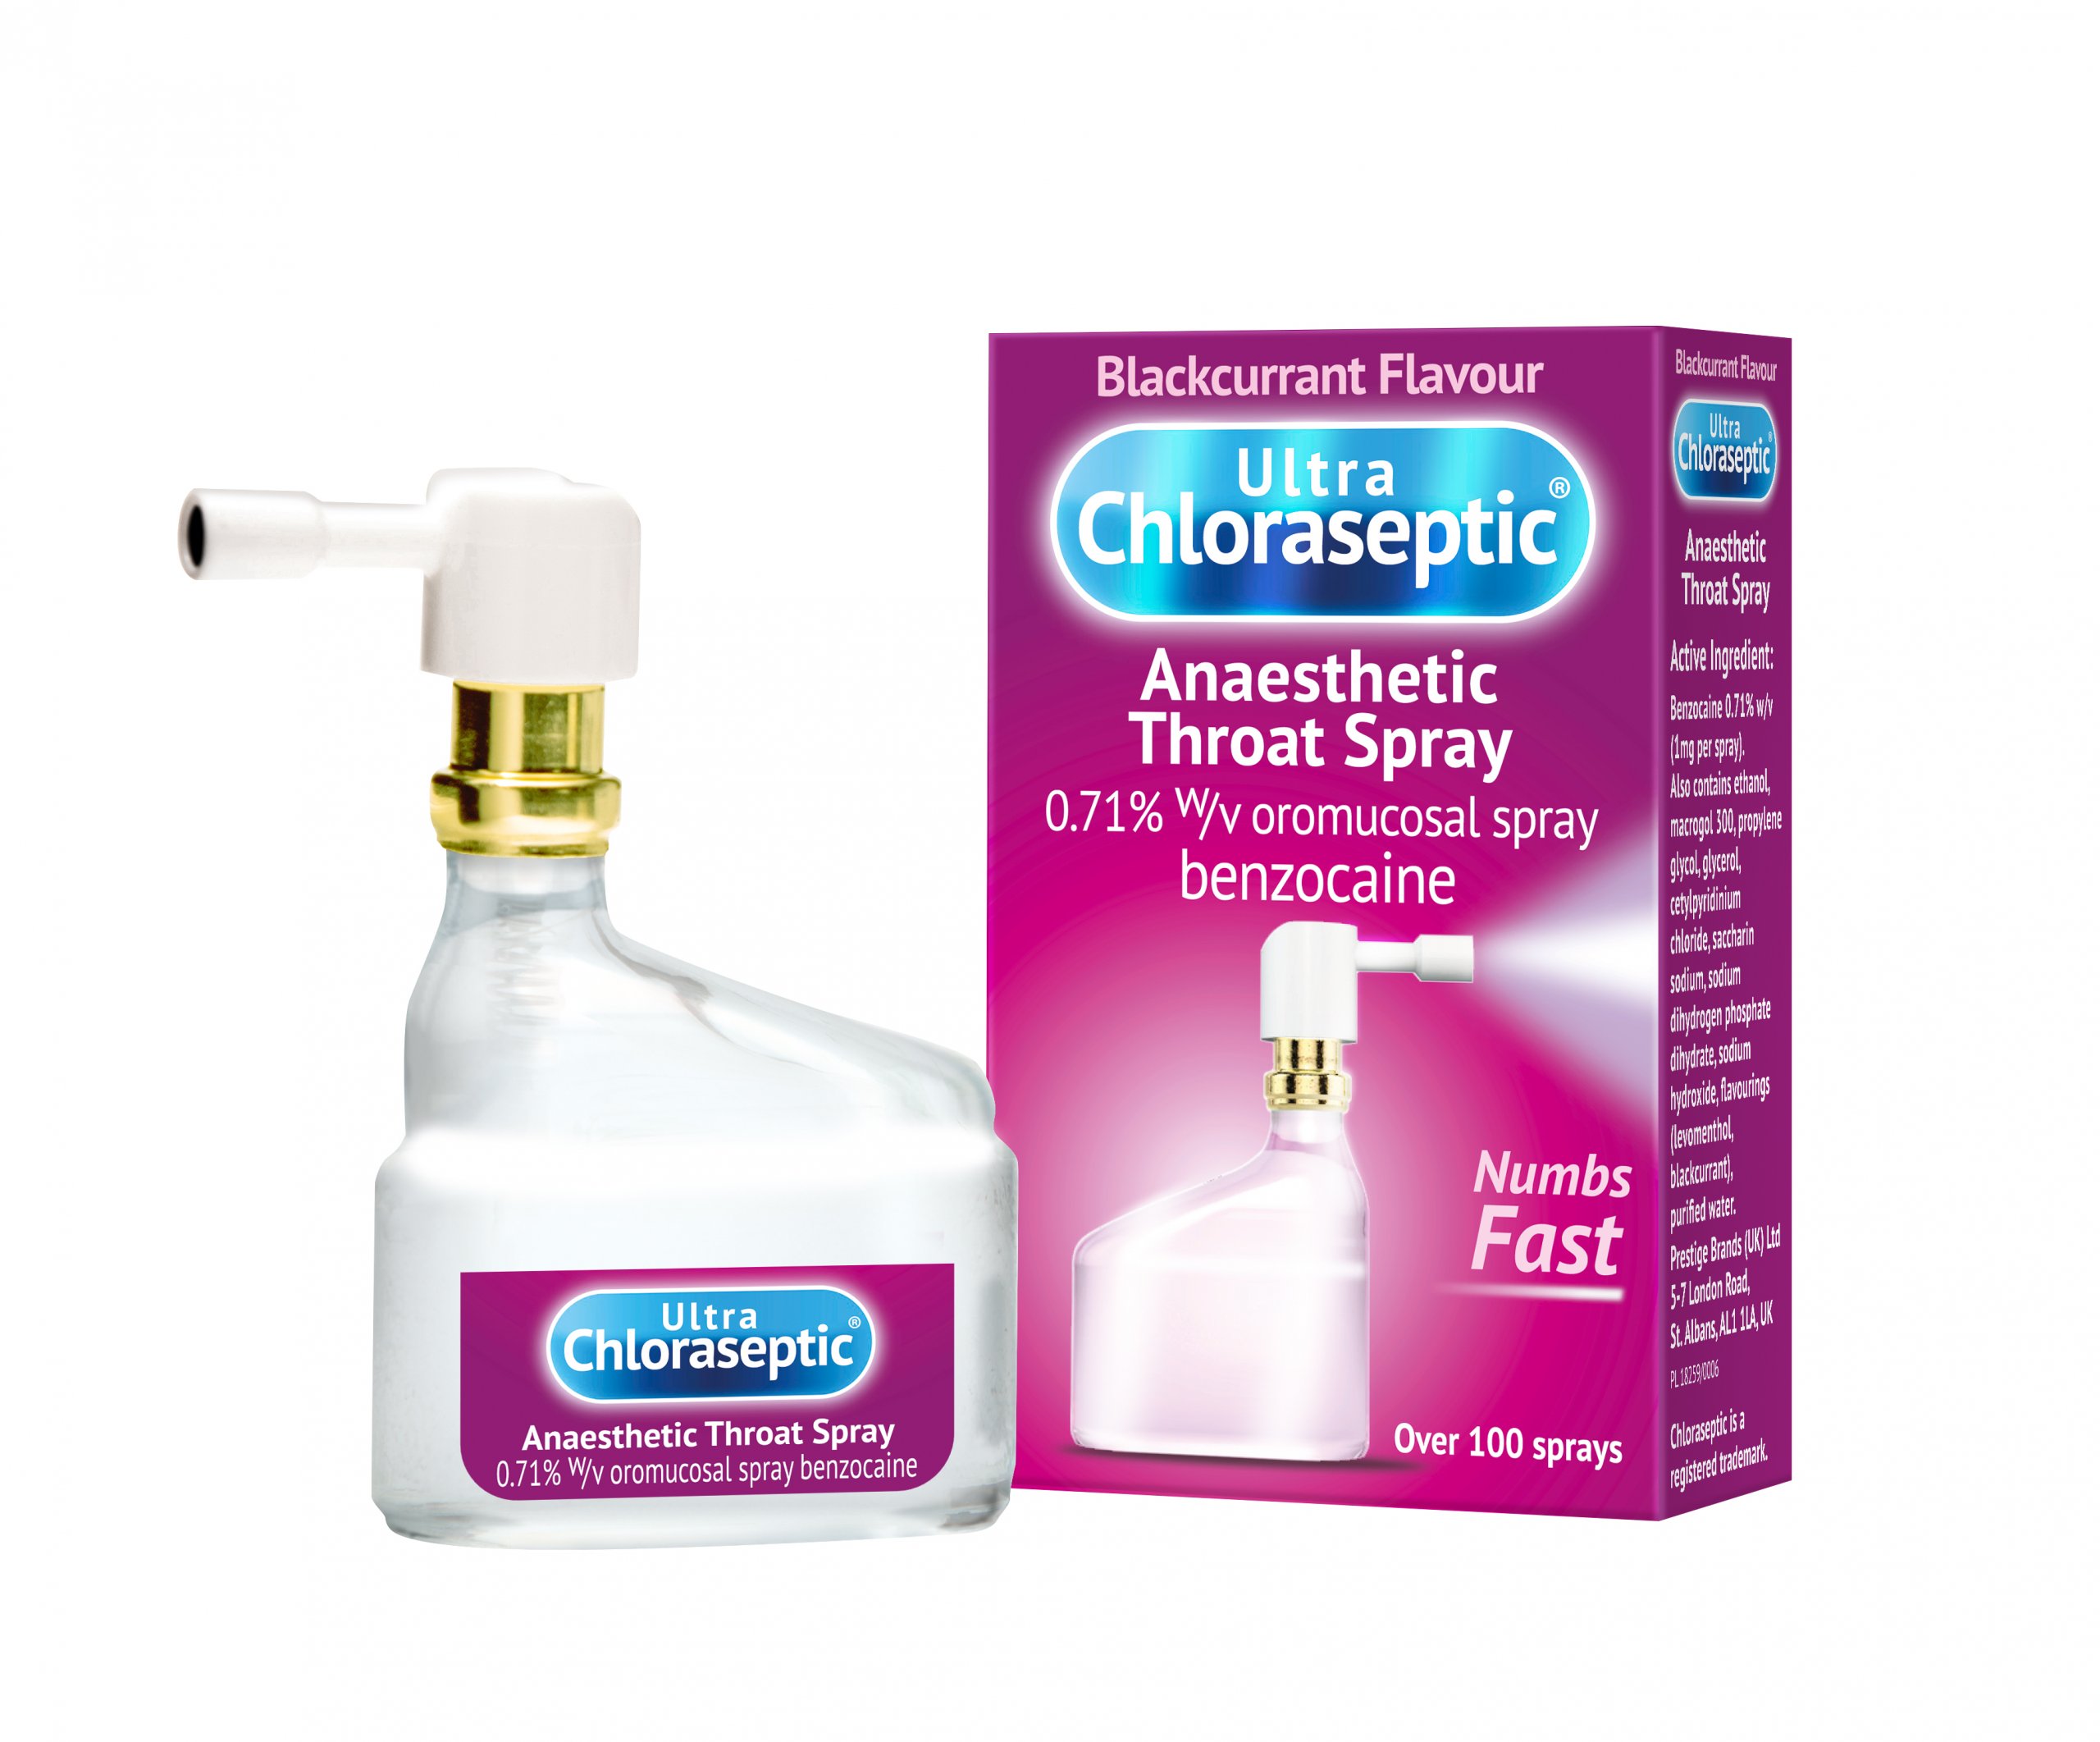 Ultra Chloraseptic blackcurrant flavoured Anaesthetic Sore Throat Spray with its purple box packaging in the background